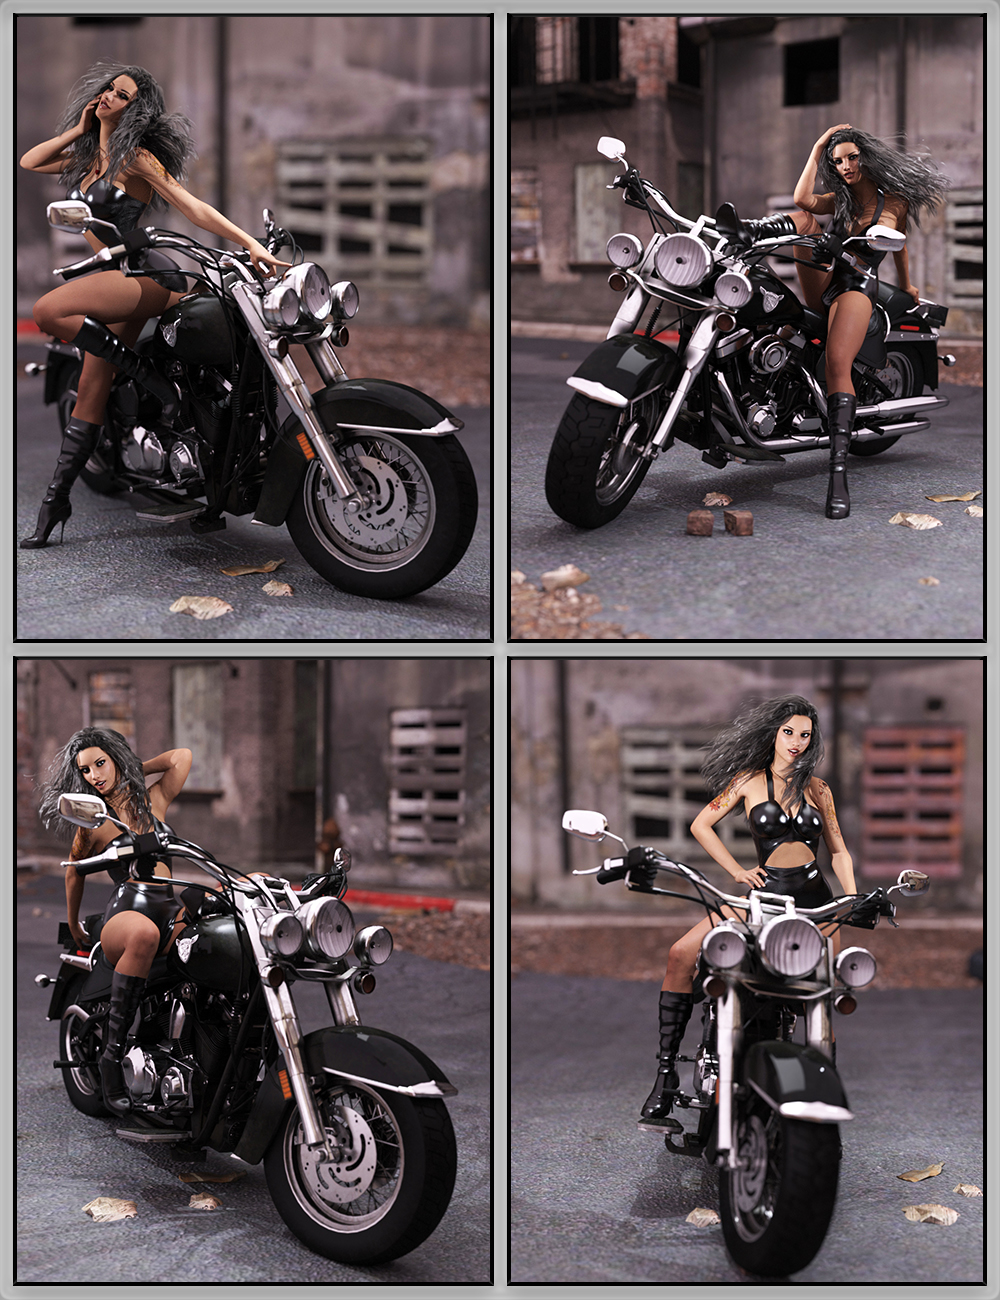 Biker Babe Poses for Genesis 3 Female by: lunchlady, 3D Models by Daz 3D